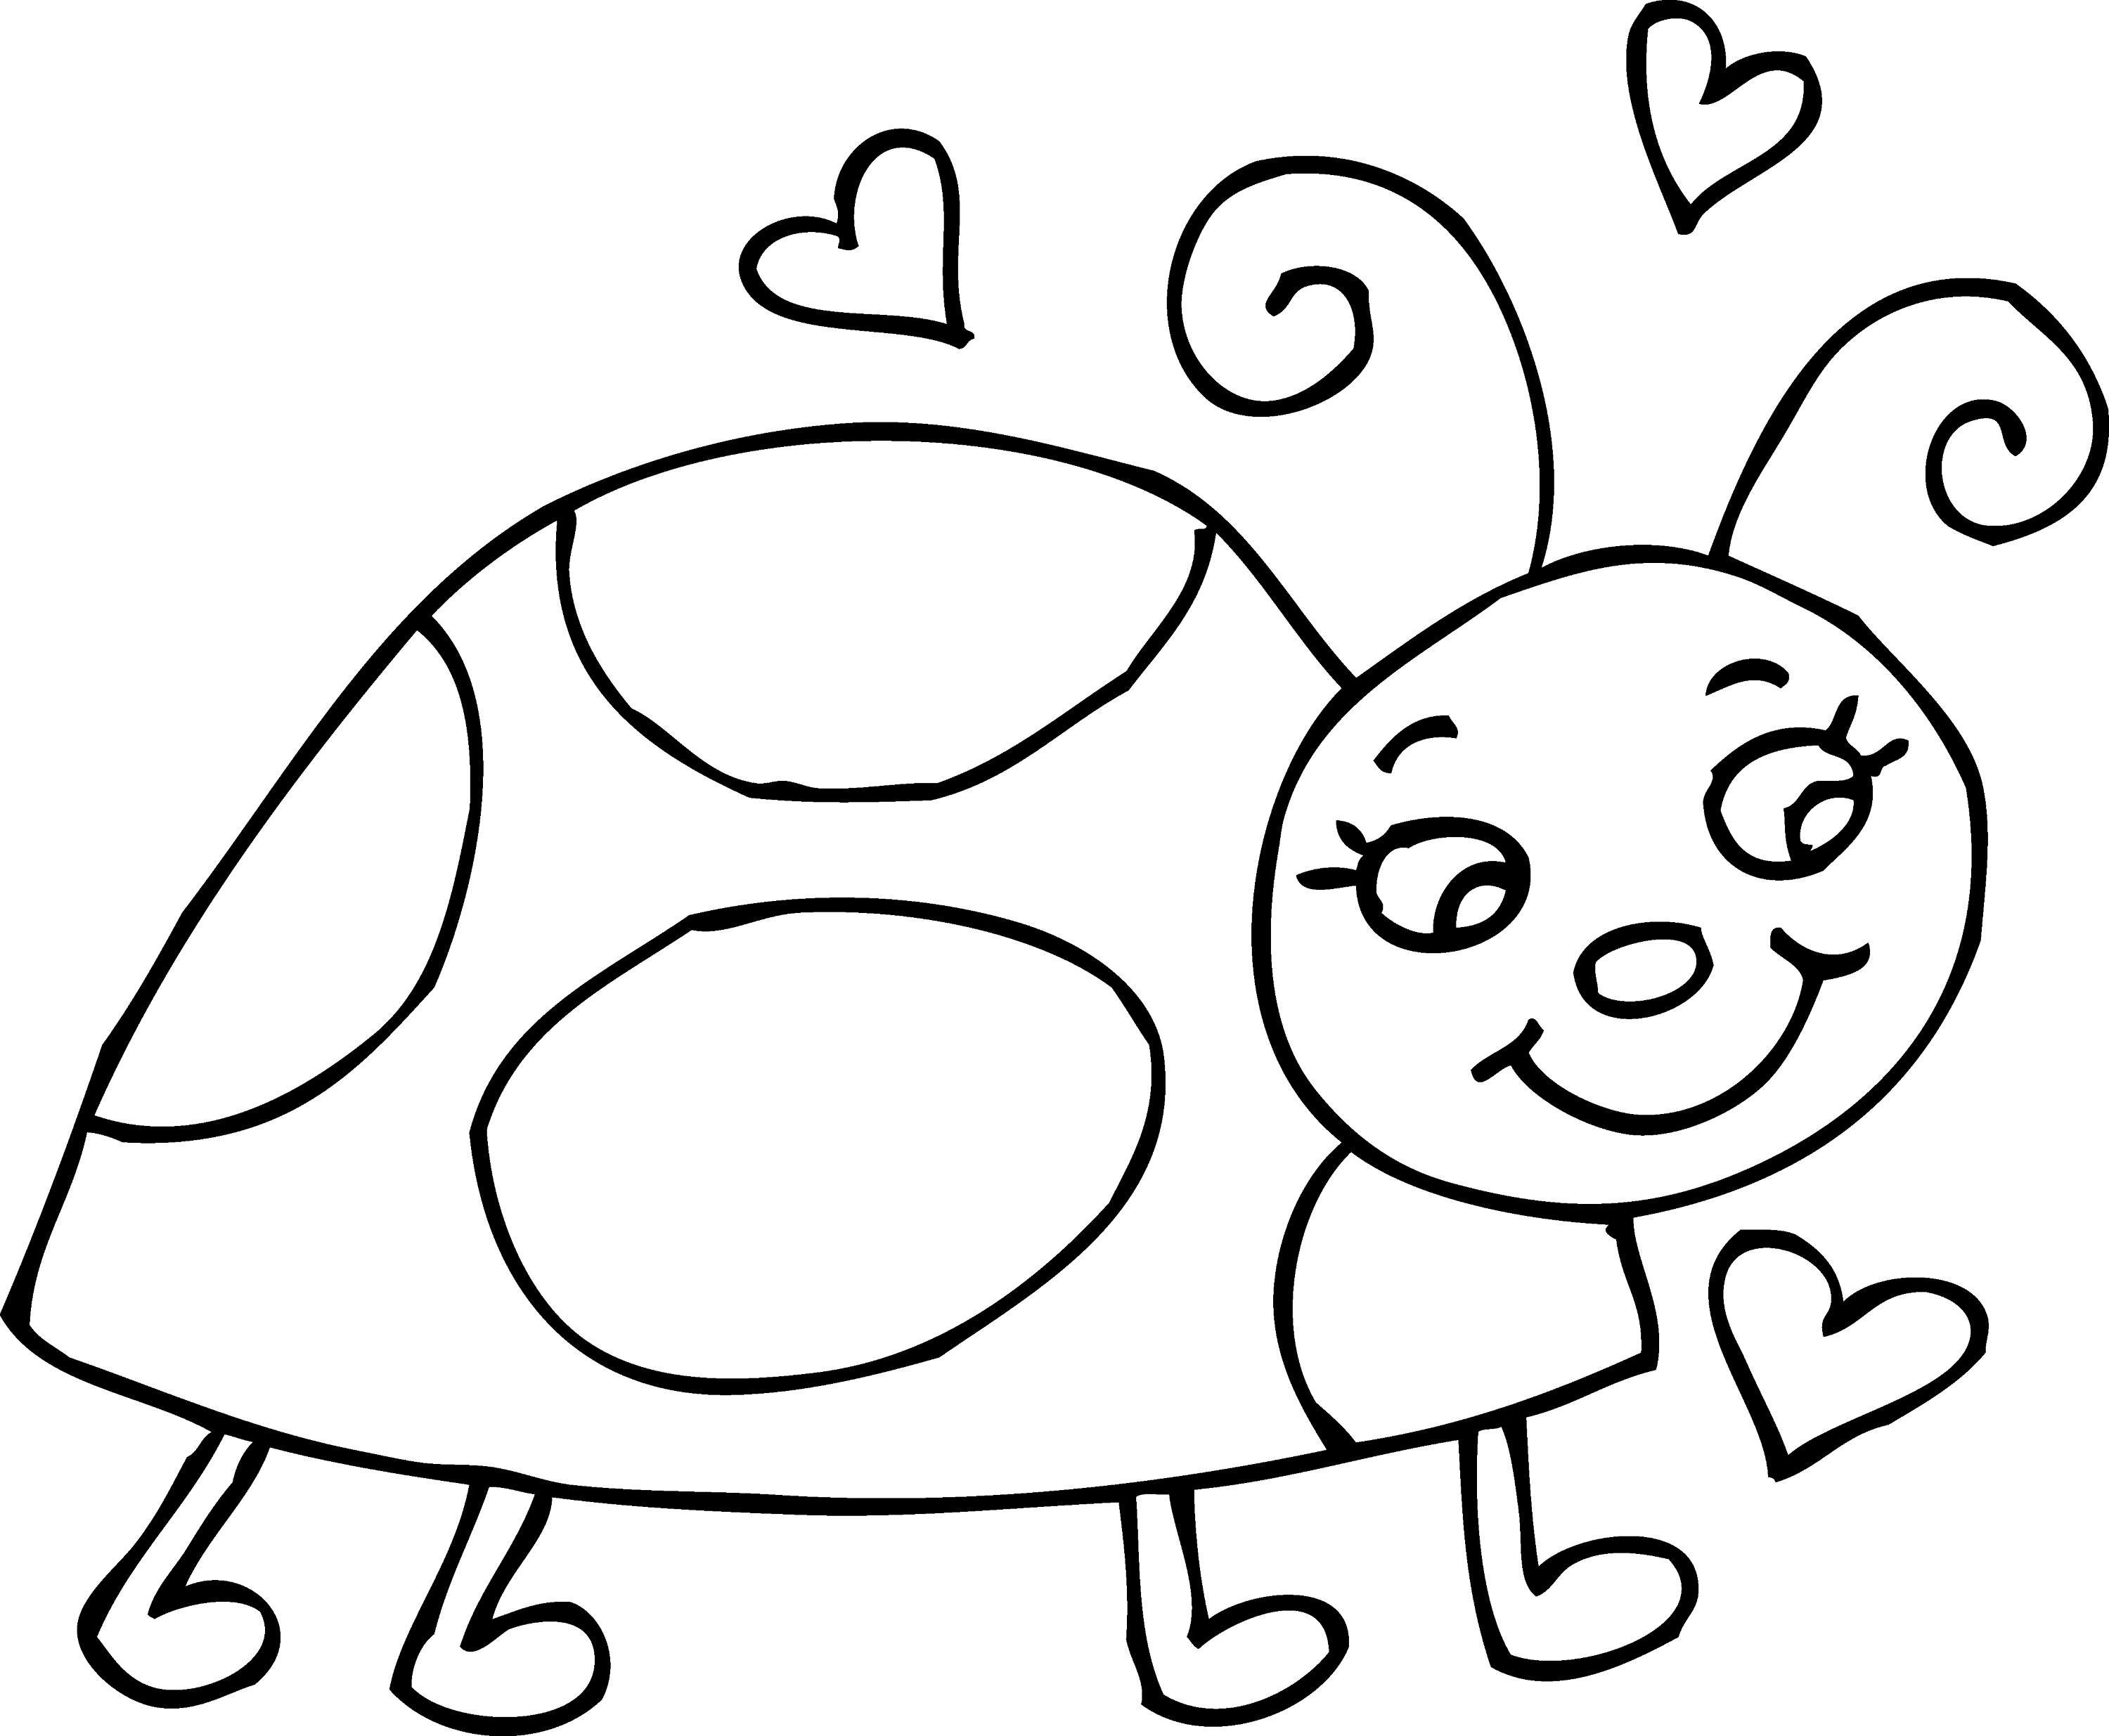 Download Line Art of Cute Ladybug With Hearts - Free Clip Art